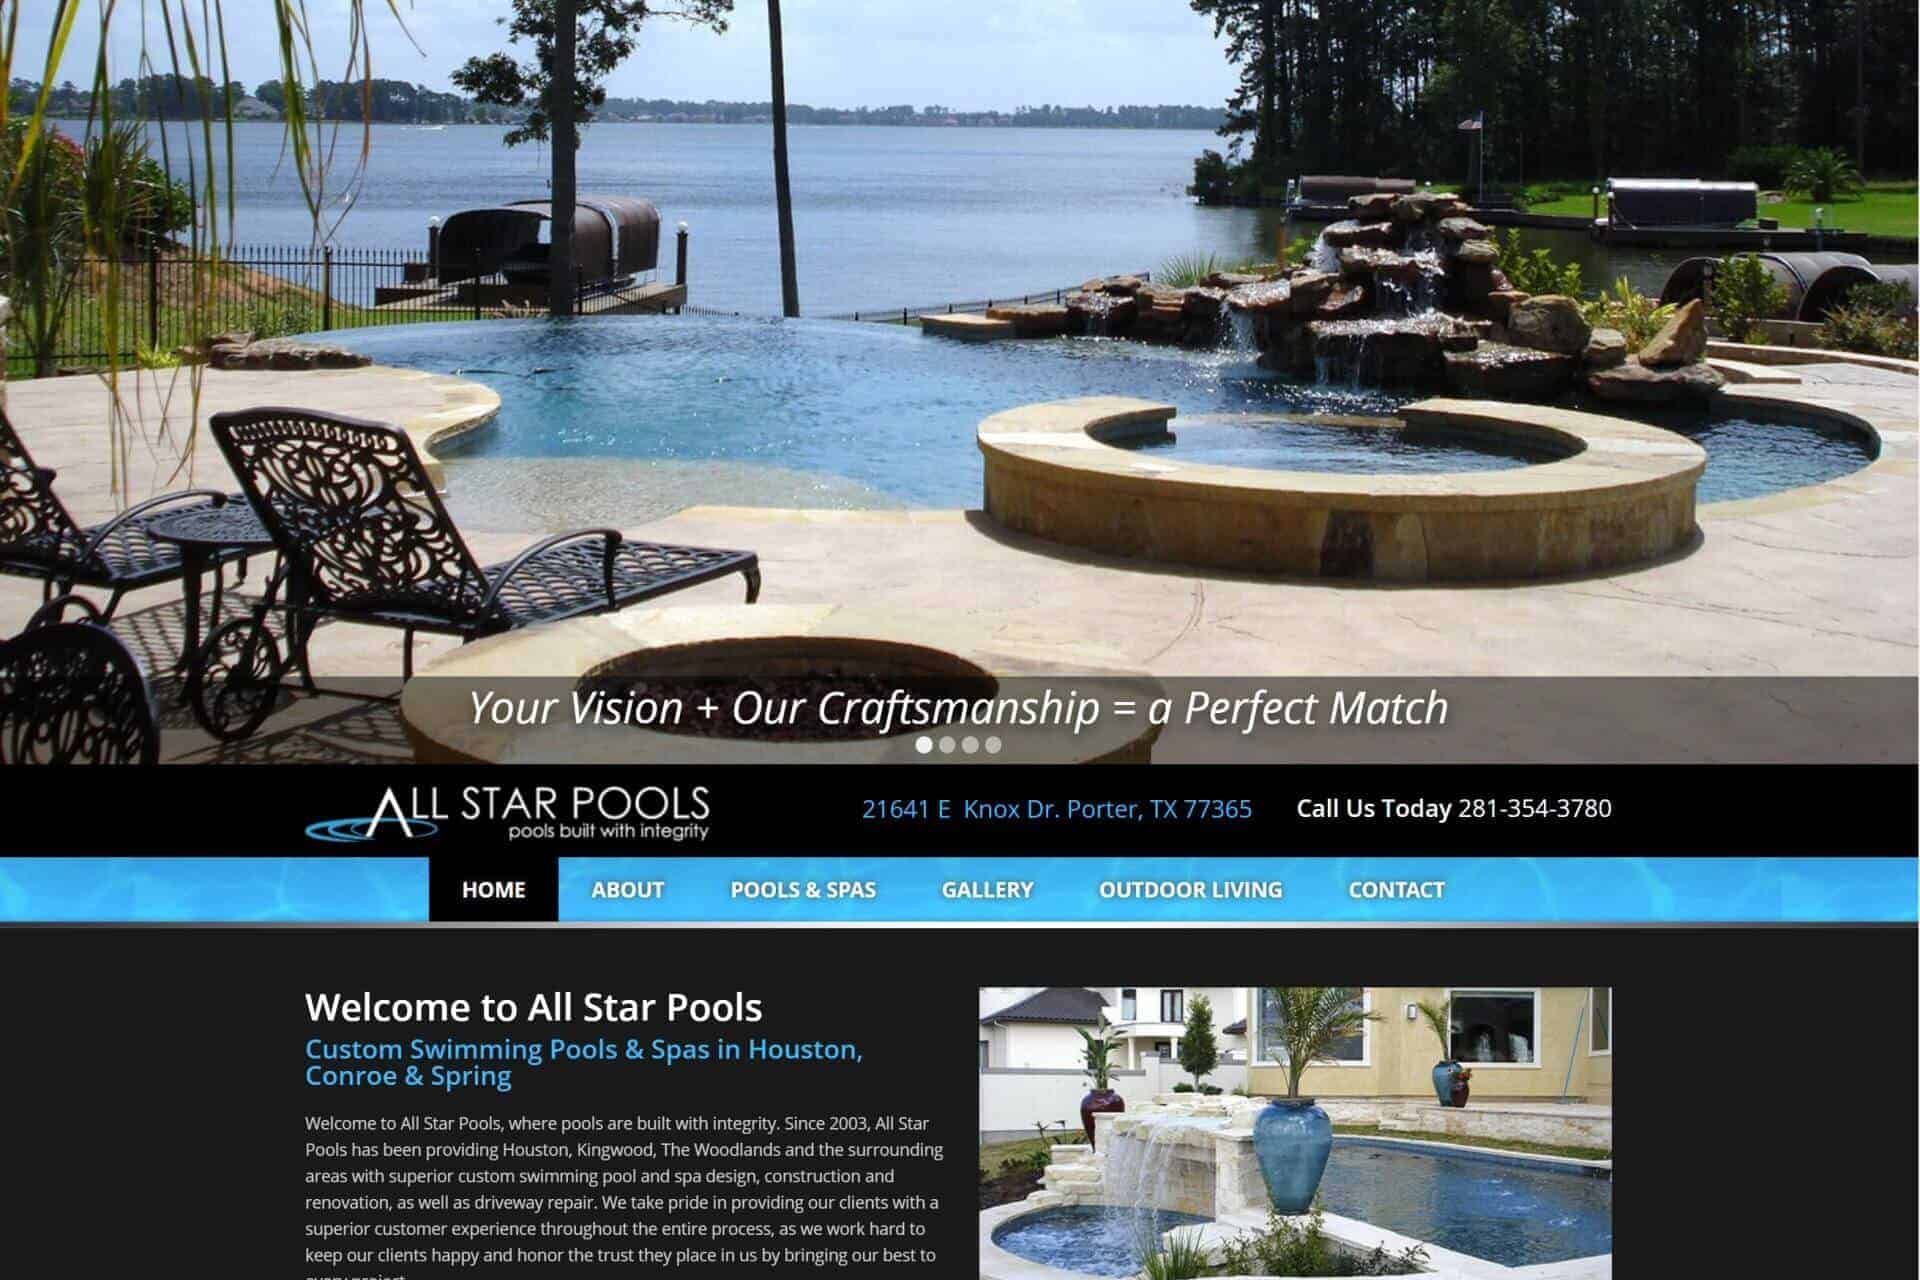 All Star Pools by Dugout Sports